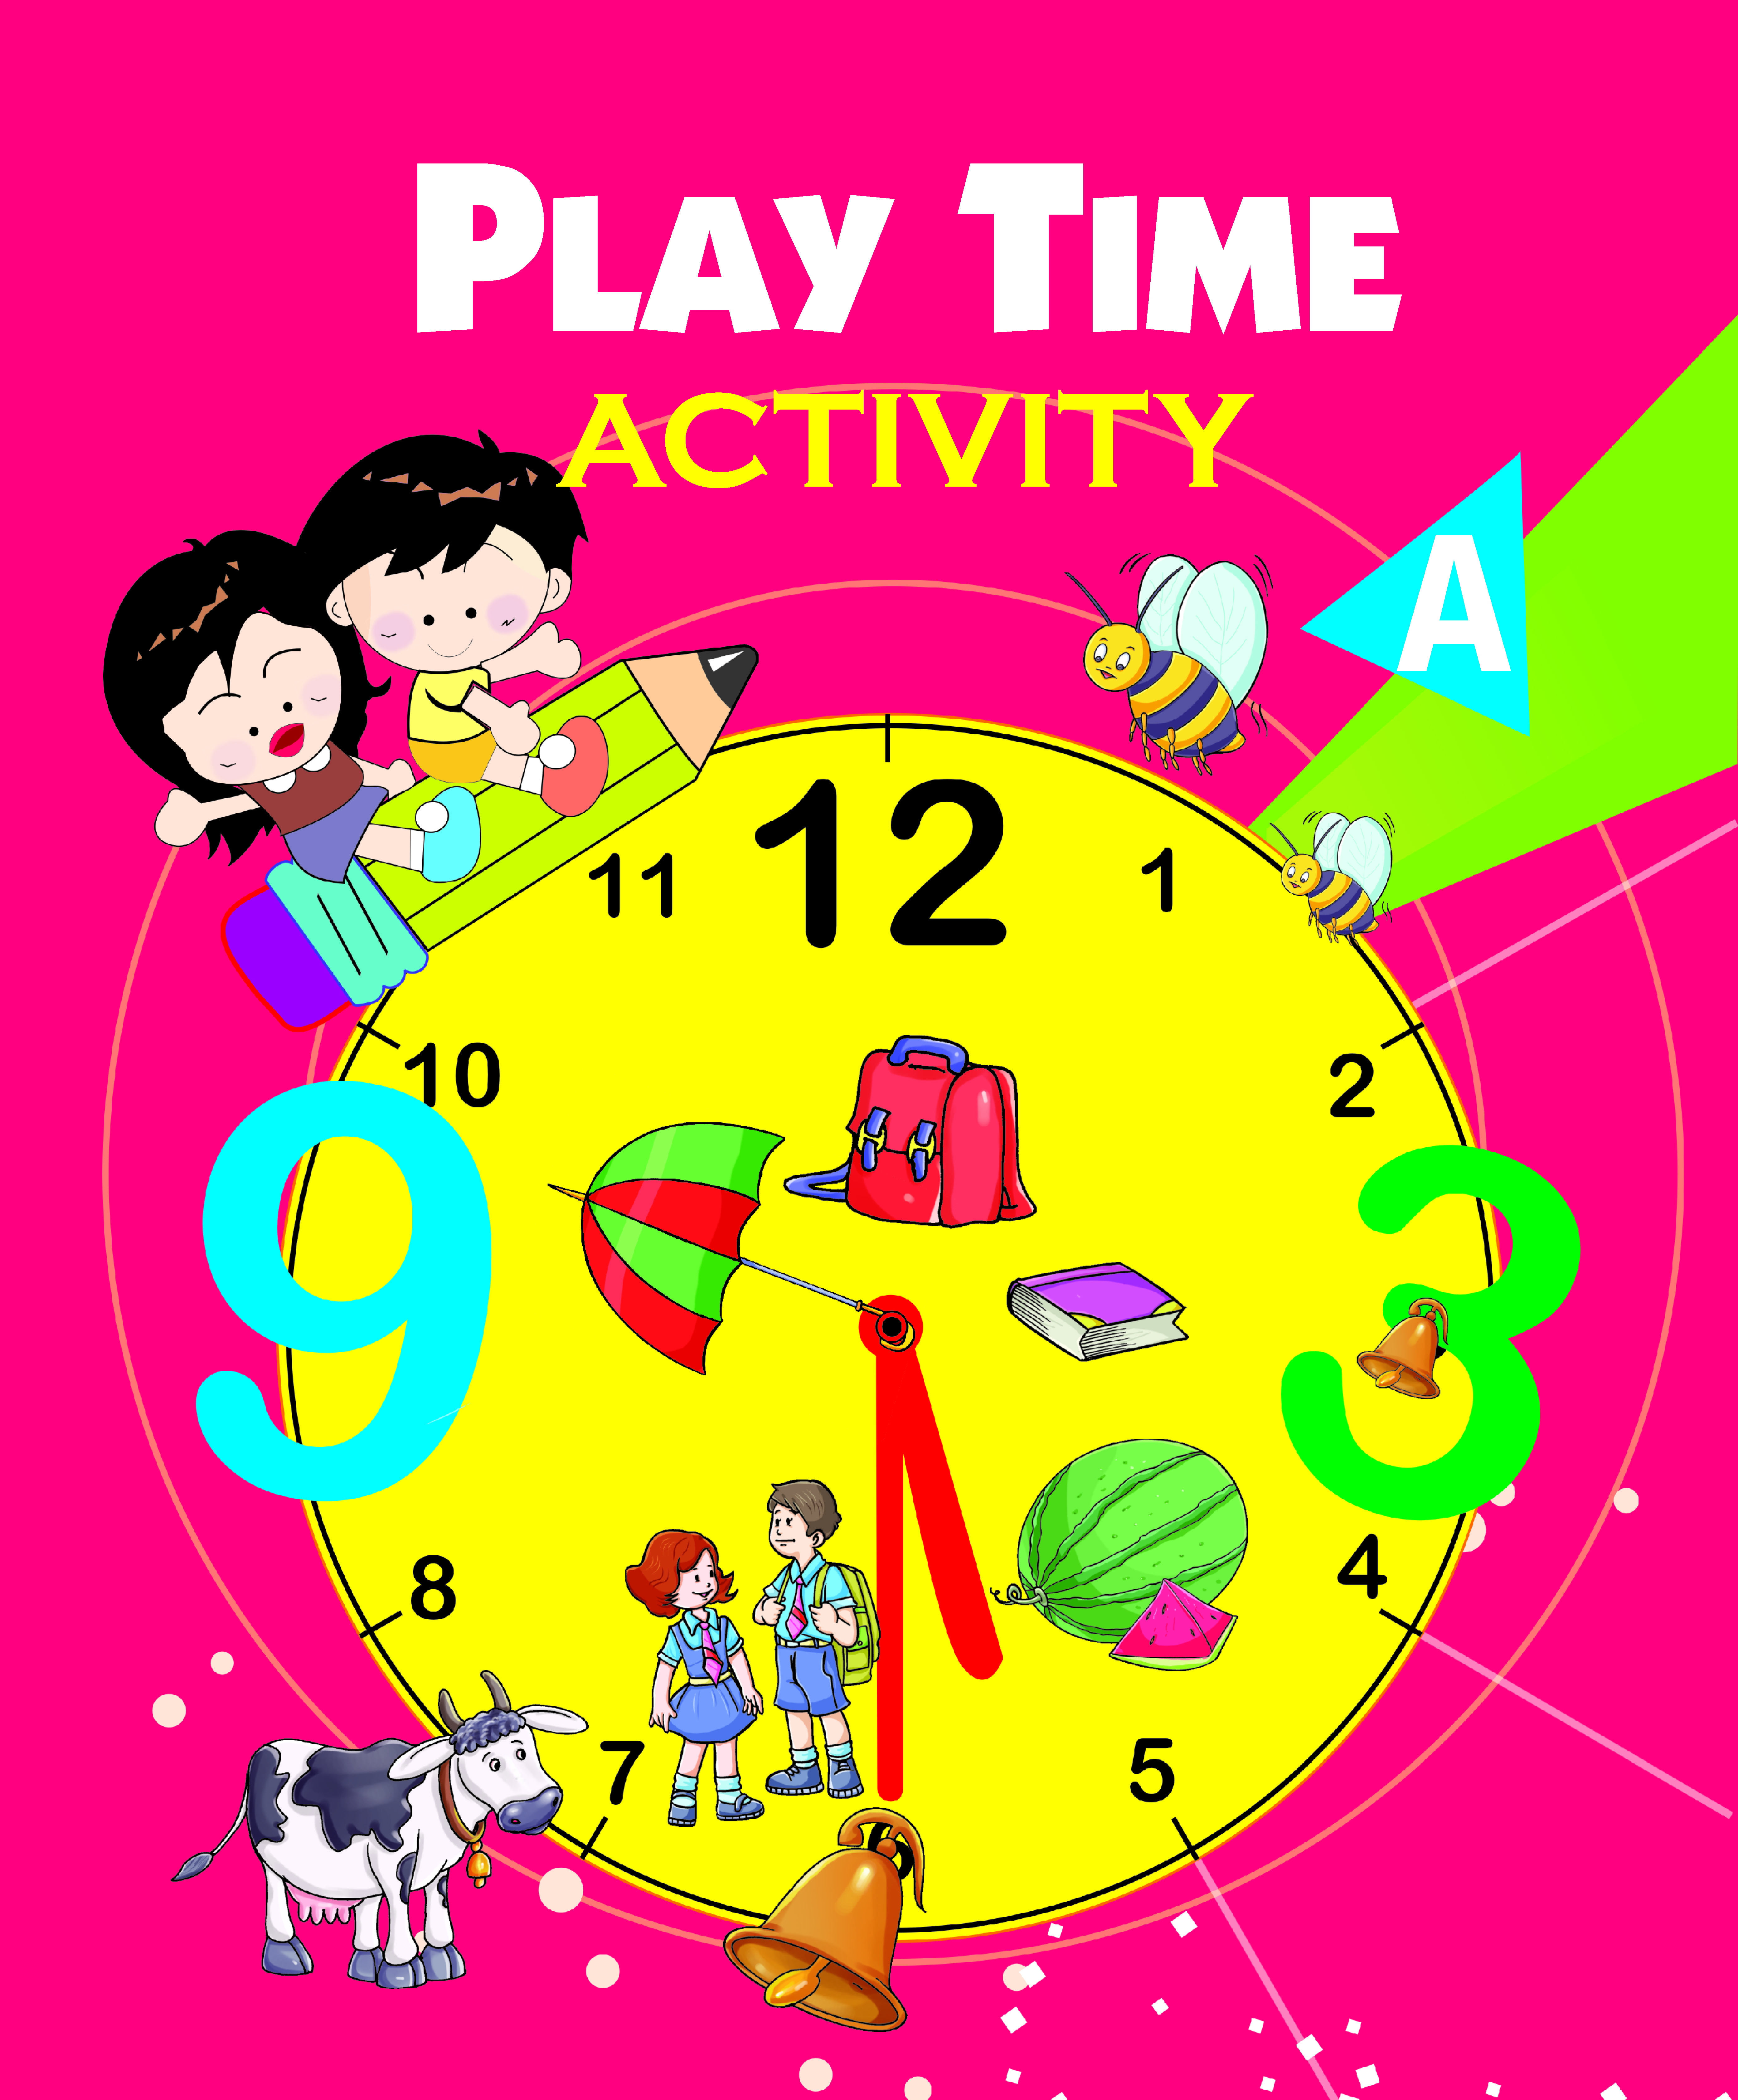 PLAY TIME ACTIVITY A